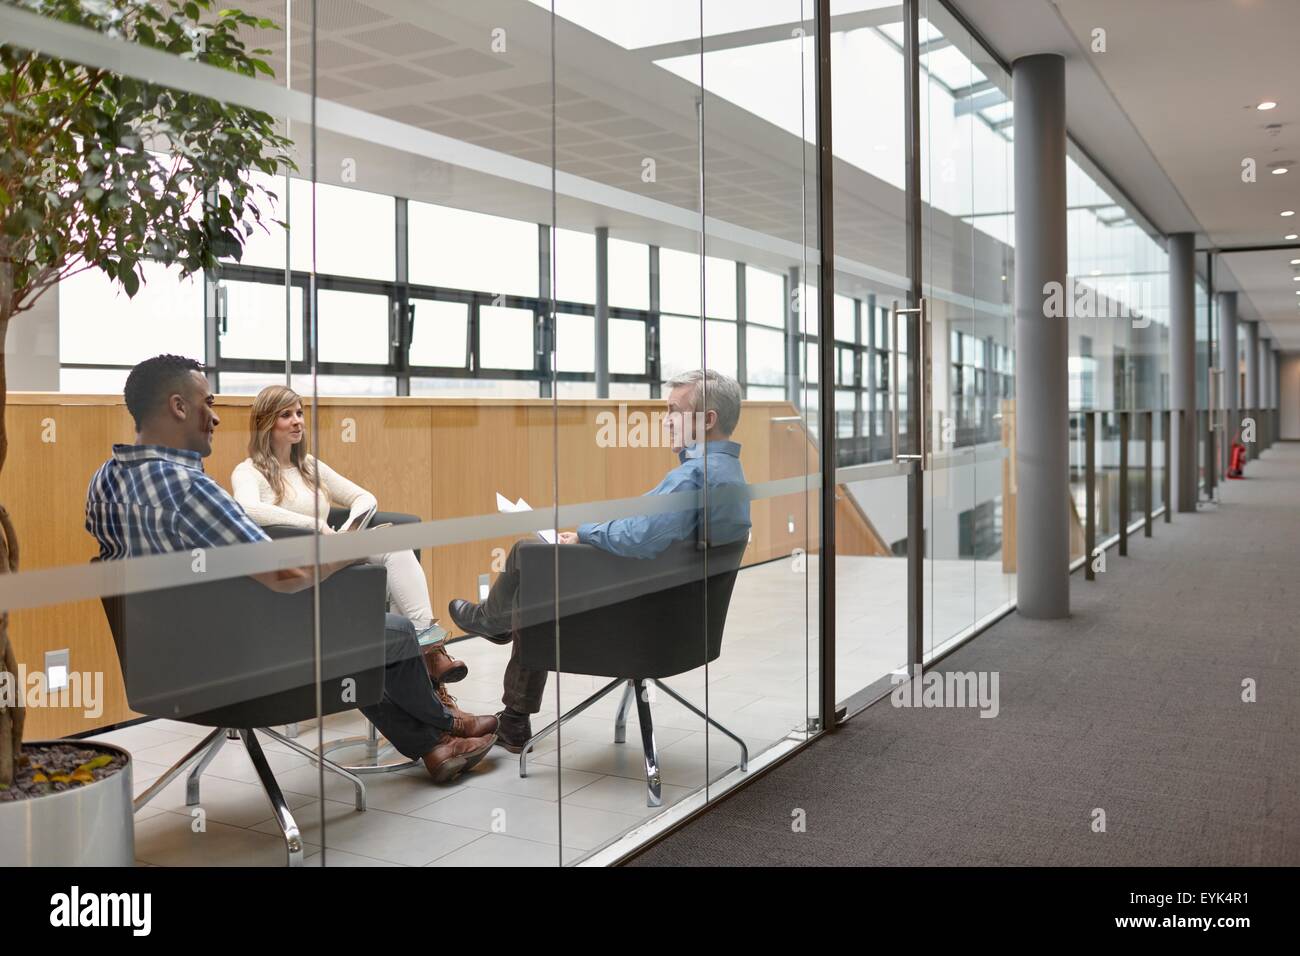 Businessmen and woman talking at conference room meeting Stock Photo